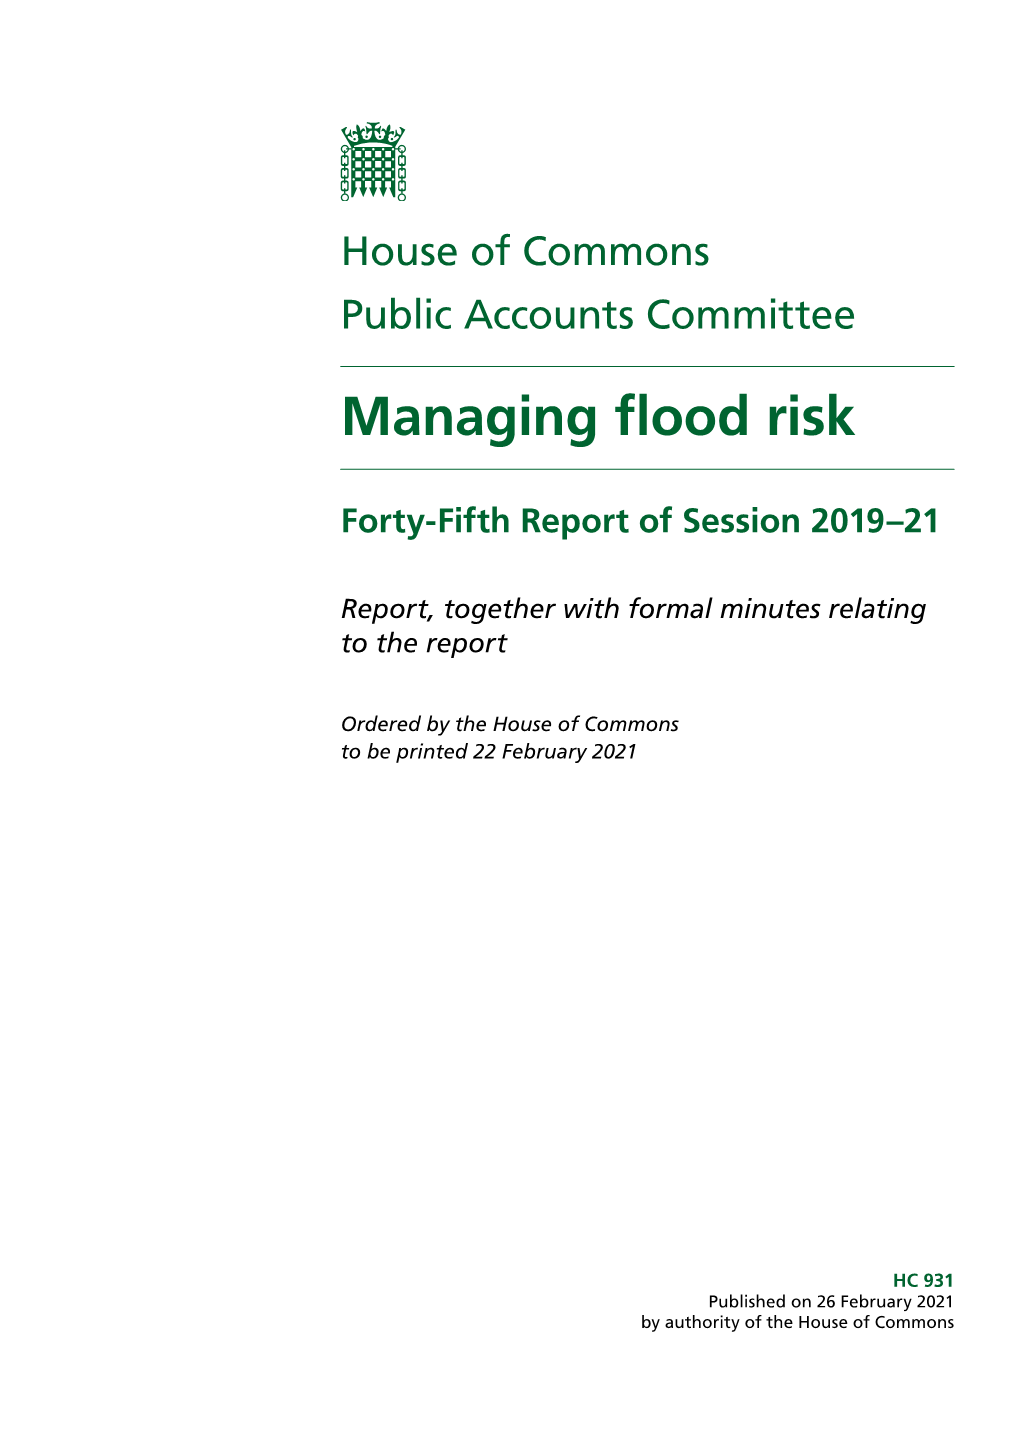 Managing Flood Risks Than They Are Allocated Through the Ministry of Housing, Communities and Local Government’S (MHCLG) Local Government Funding Formula